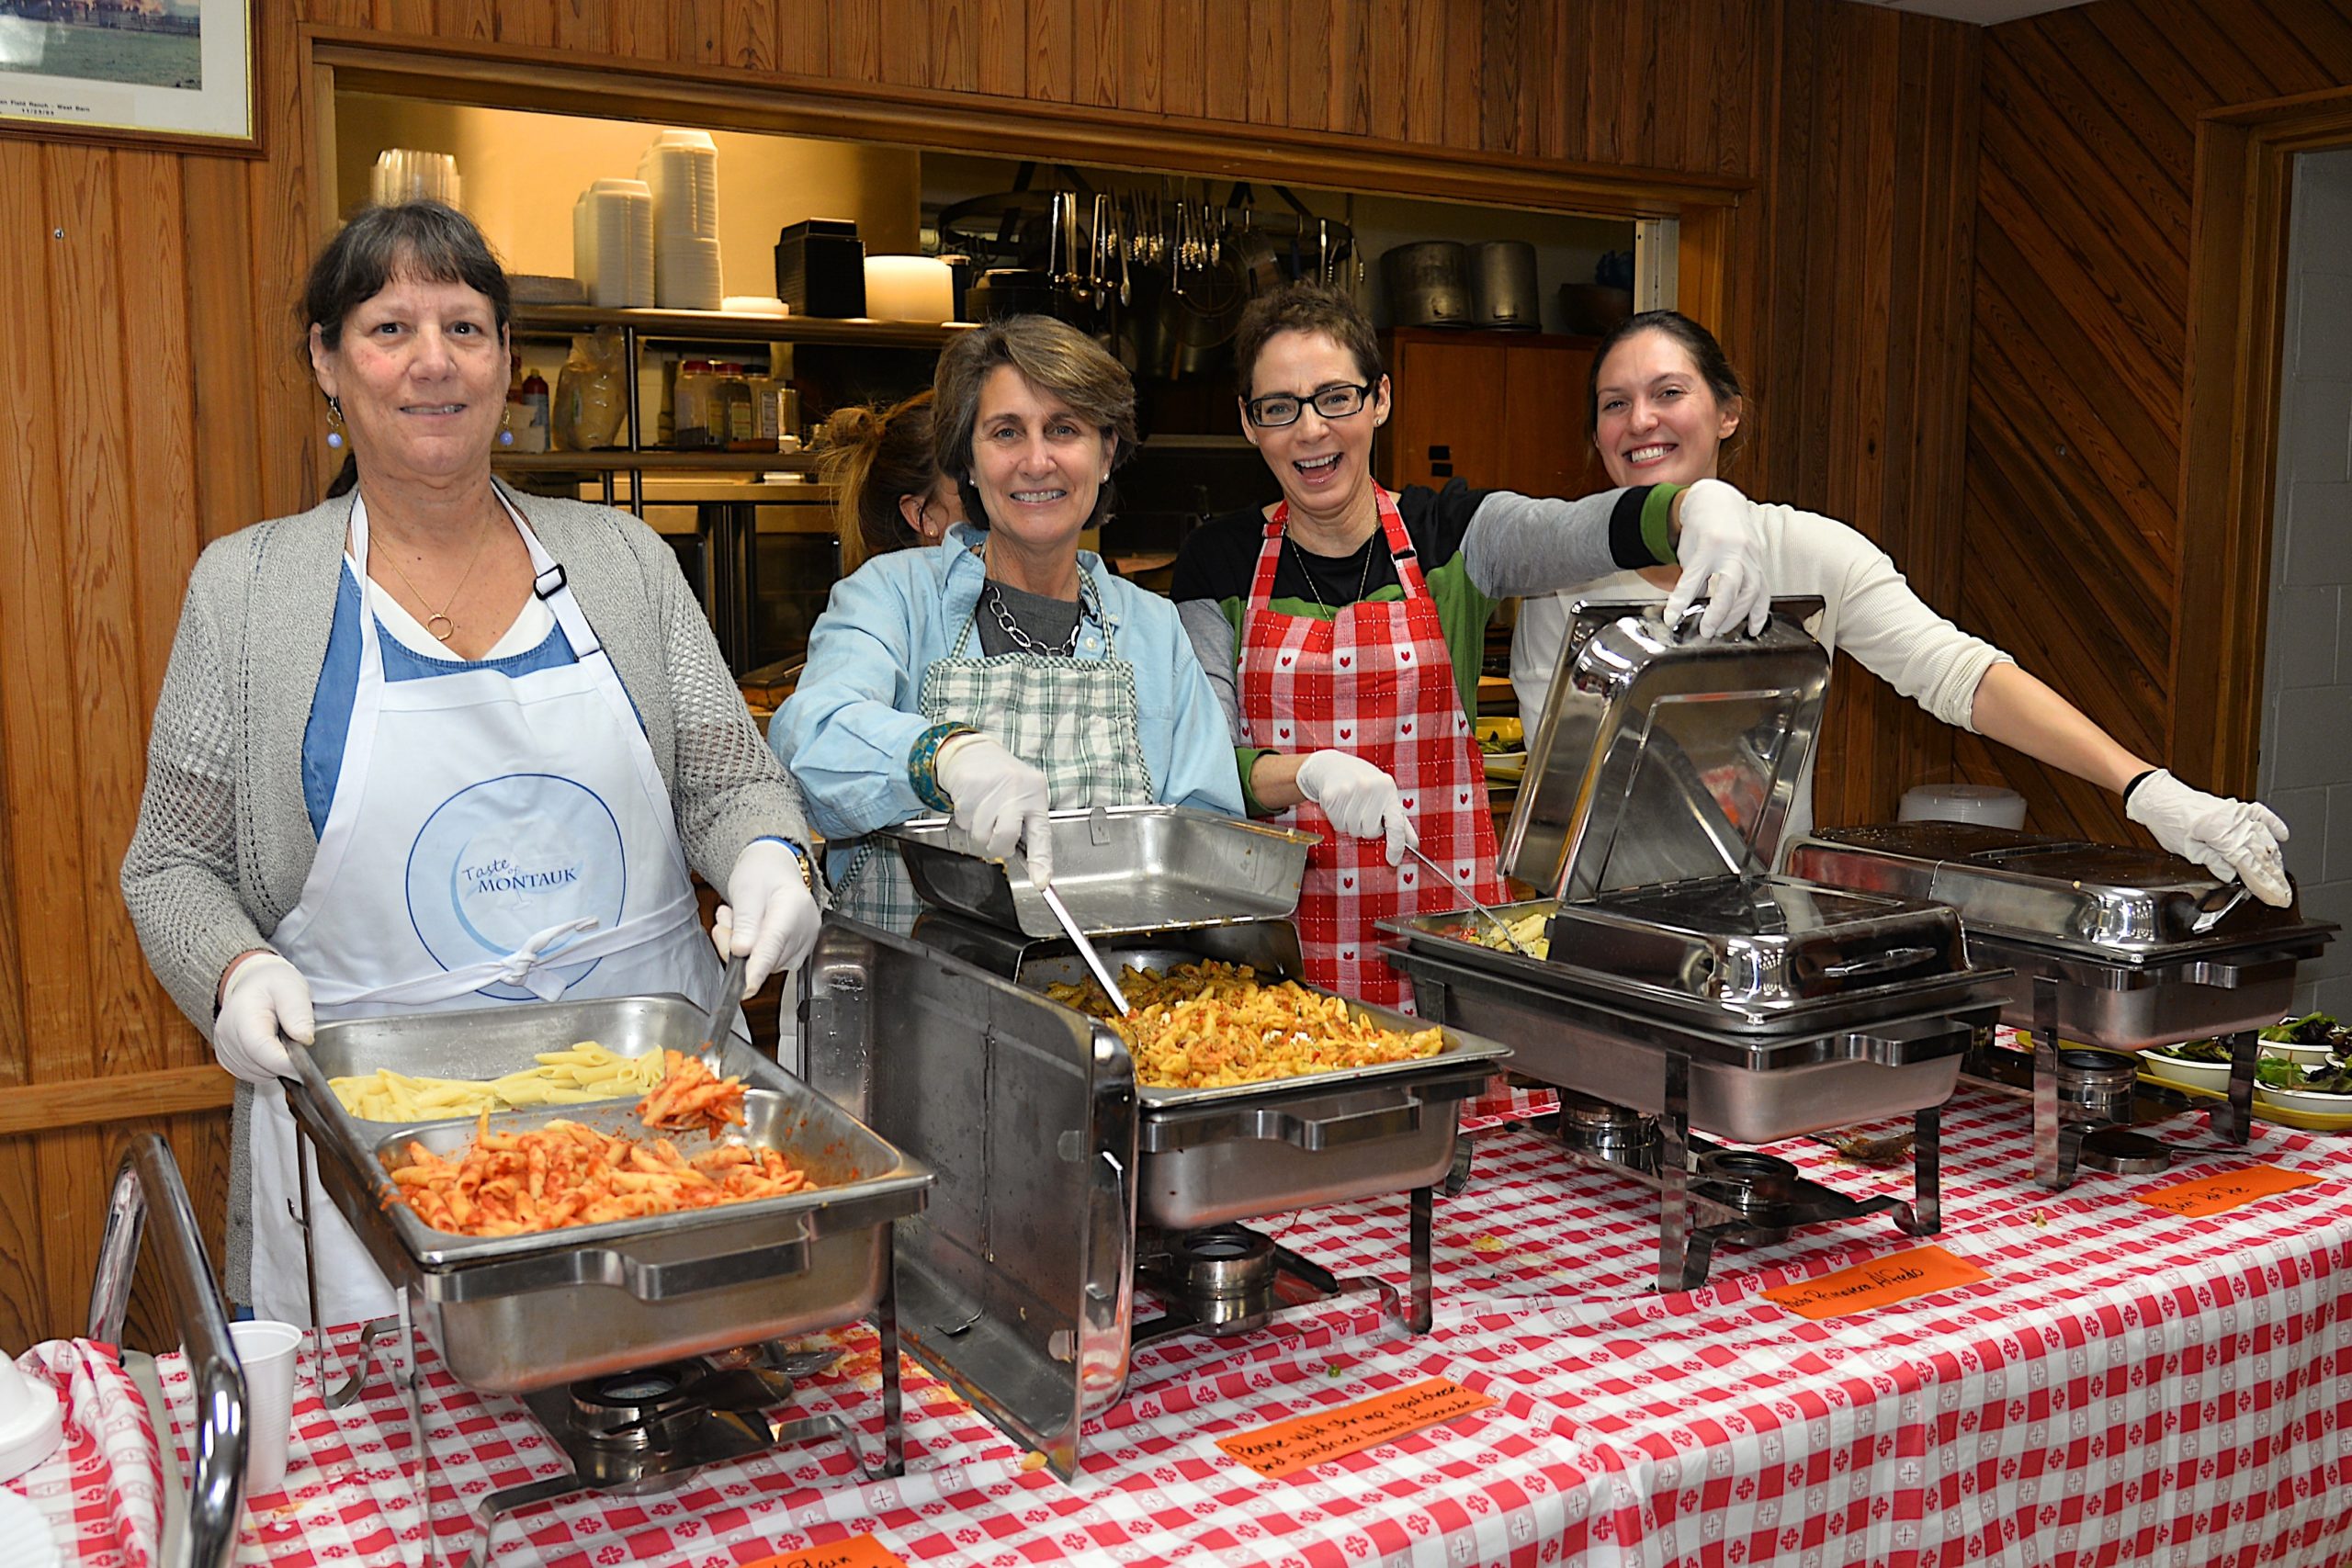 A pasta dinner fundraiser took place at the Montauk firehouse on Saturday to benefit the Robert R. Fisher scholarship fund. Dishing out the pasta were, from left, Donna DiPaolo, Judith Pfister, Patricia Byrne and Nicole George. KYRIL BROMLEY